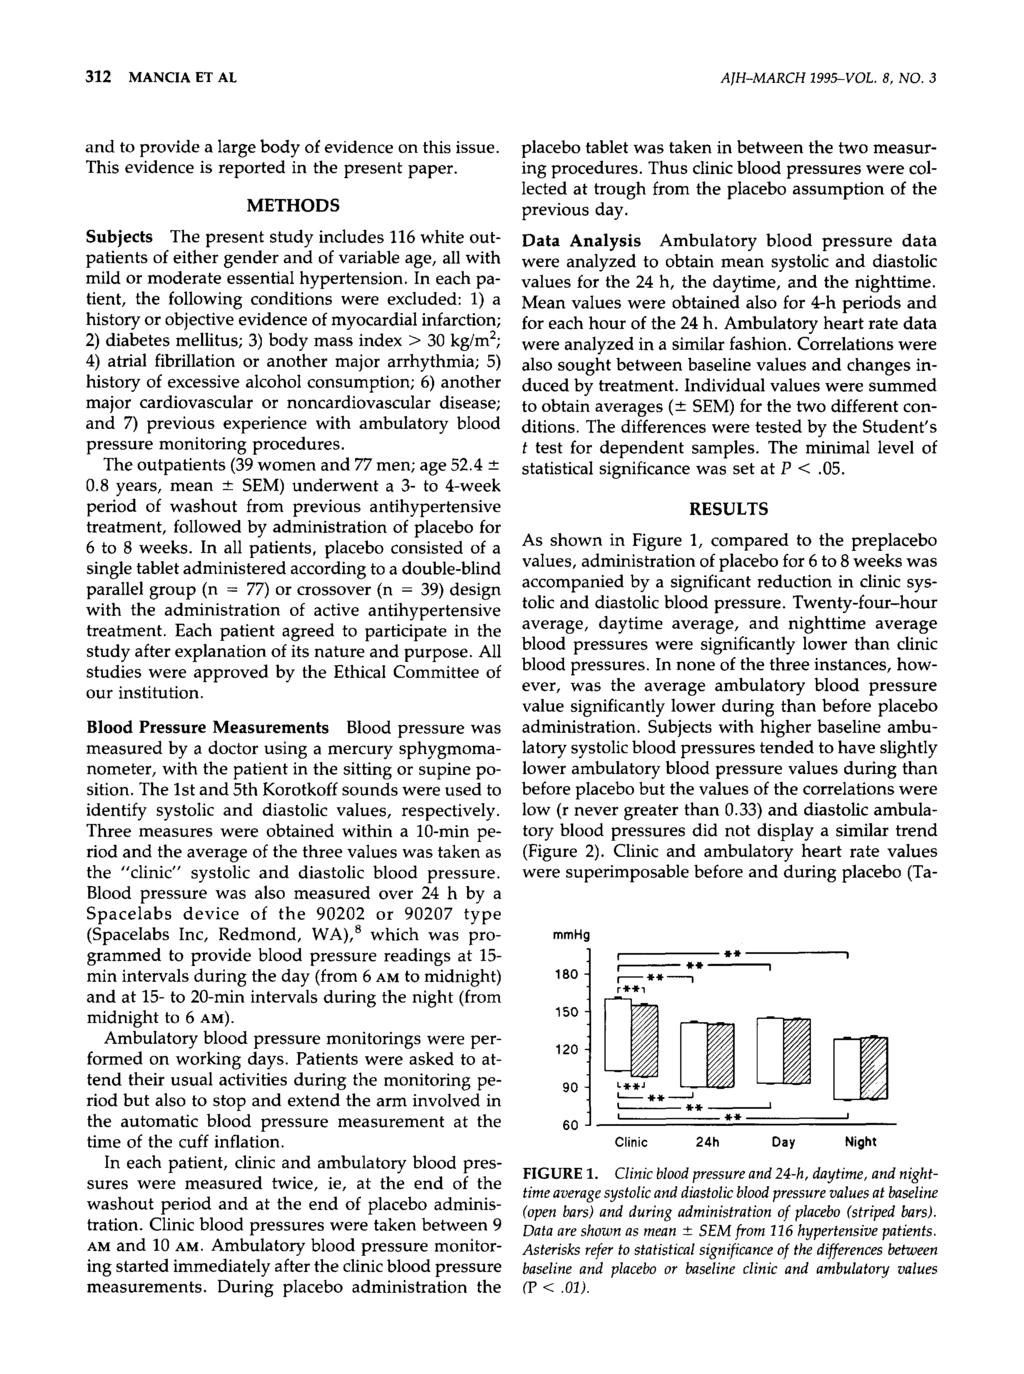 312 MANCIA ET AL AJH-MARCH 1995-VOL. 8, NO. 3 and to provide a large body of evidence on this issue. This evidence is reported in the present paper.